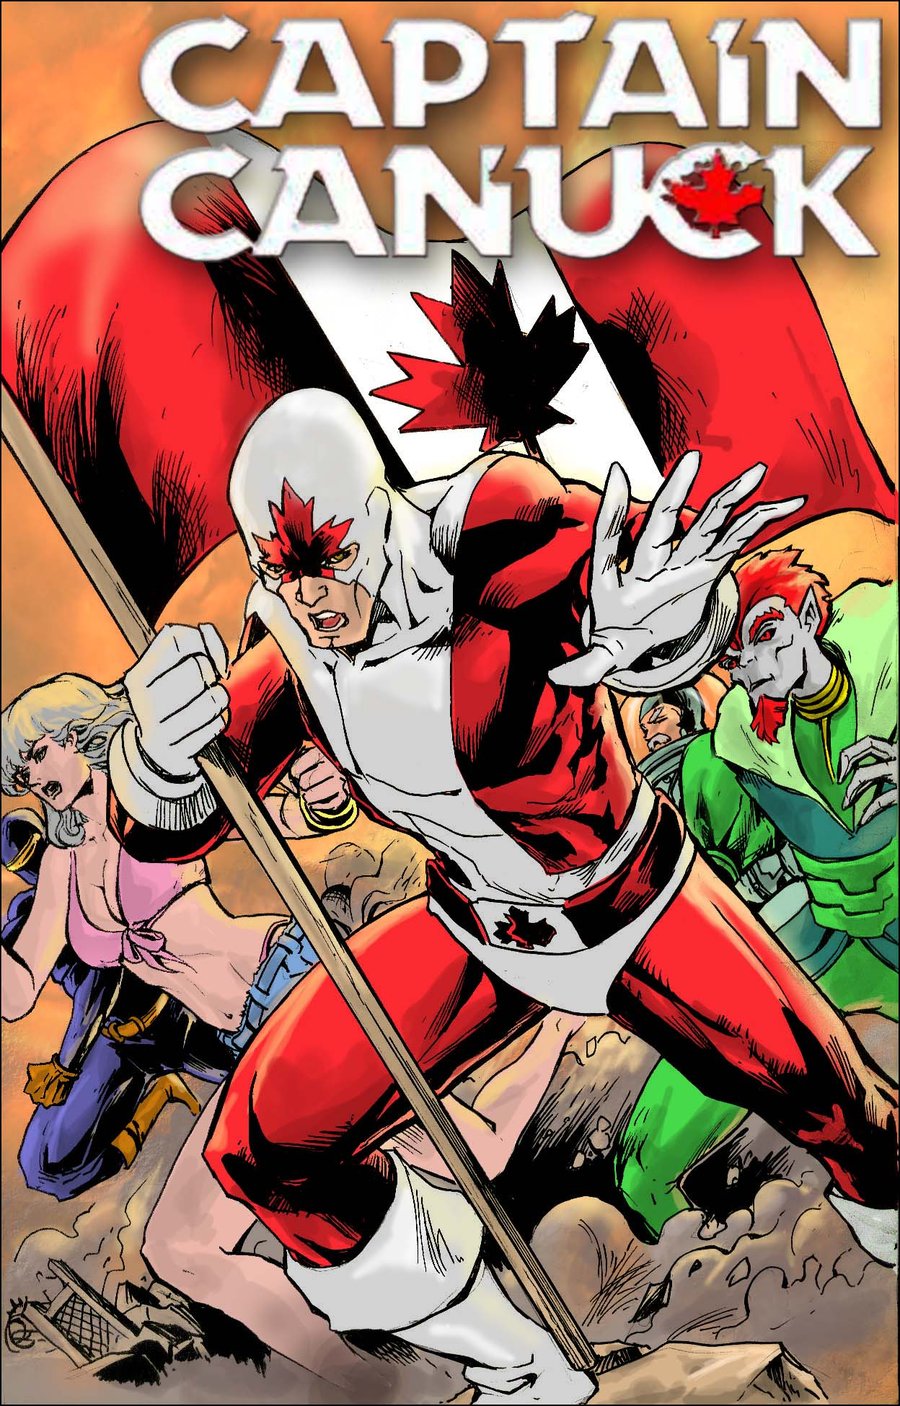 Captain_Canuck_ENTRY_53_by_TheAmbushBug.jpg